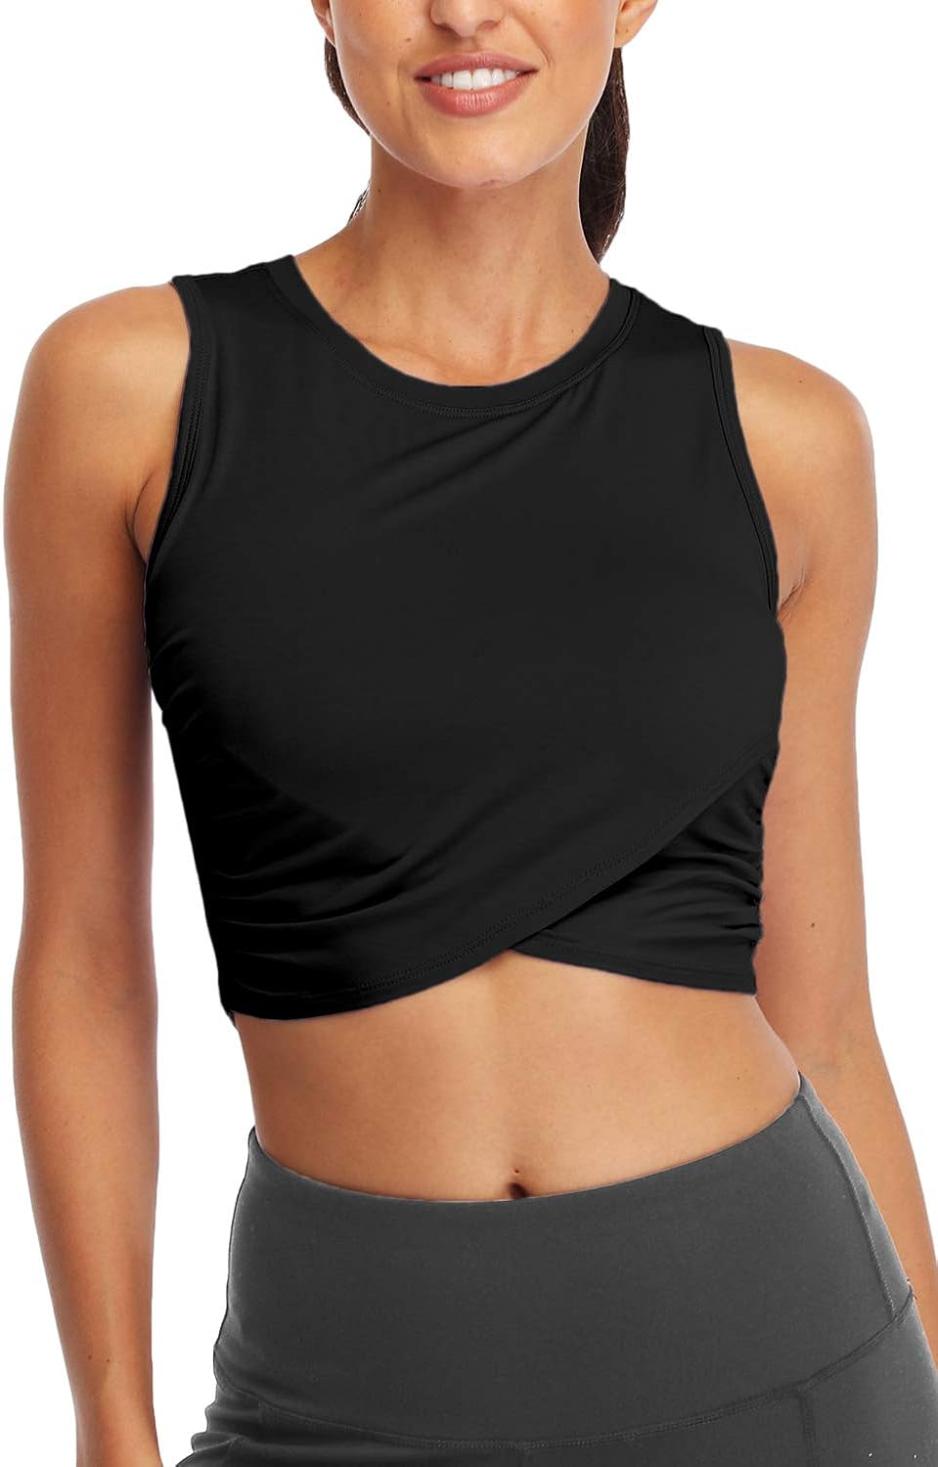 What Are The Best Workout Tops For Hot Weather?